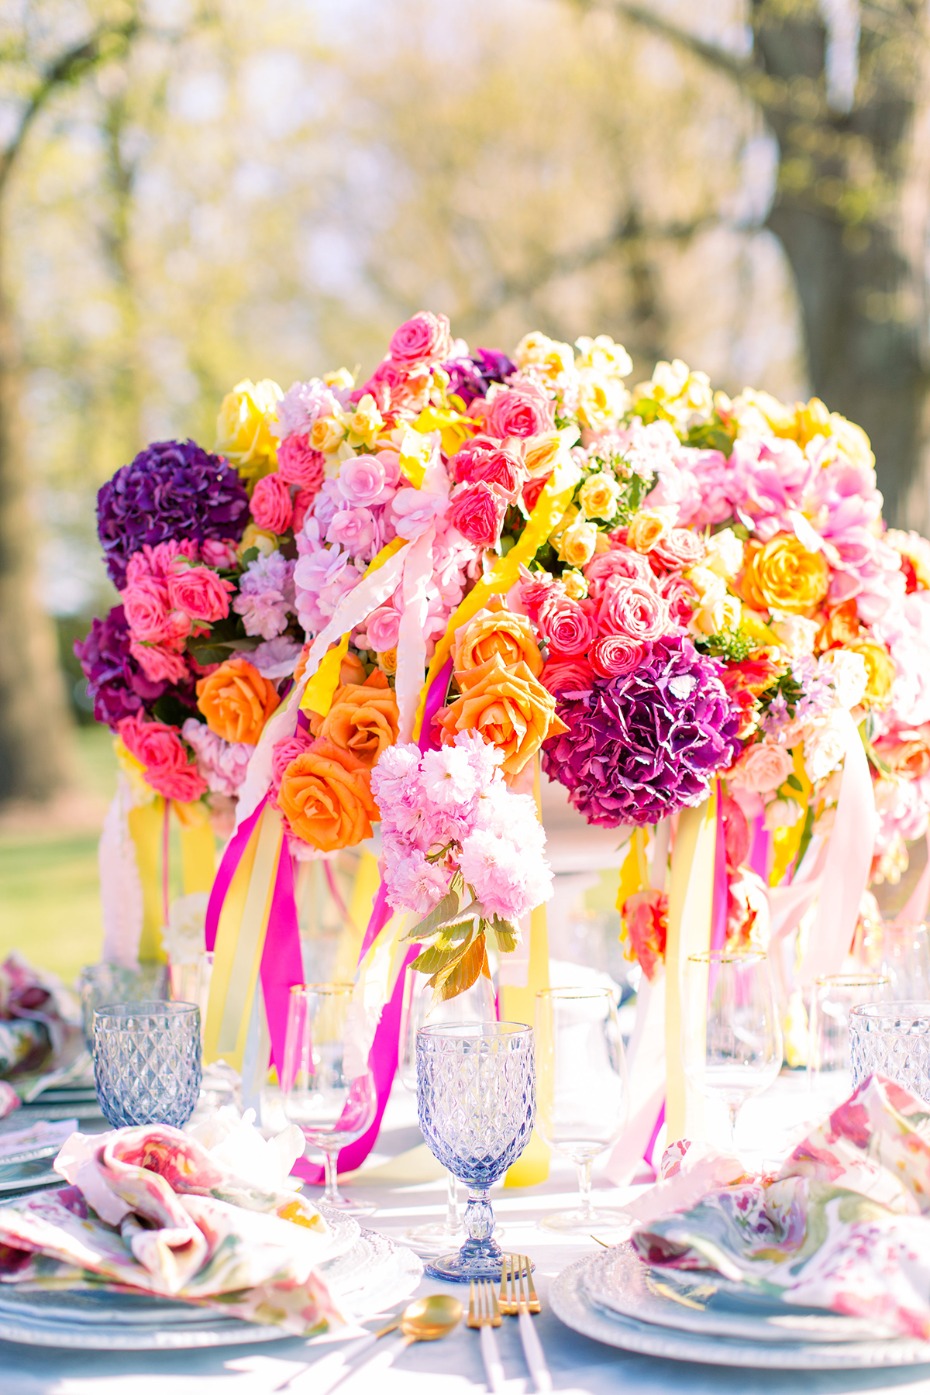 bright and colorful centerpiece ideas with ribbons